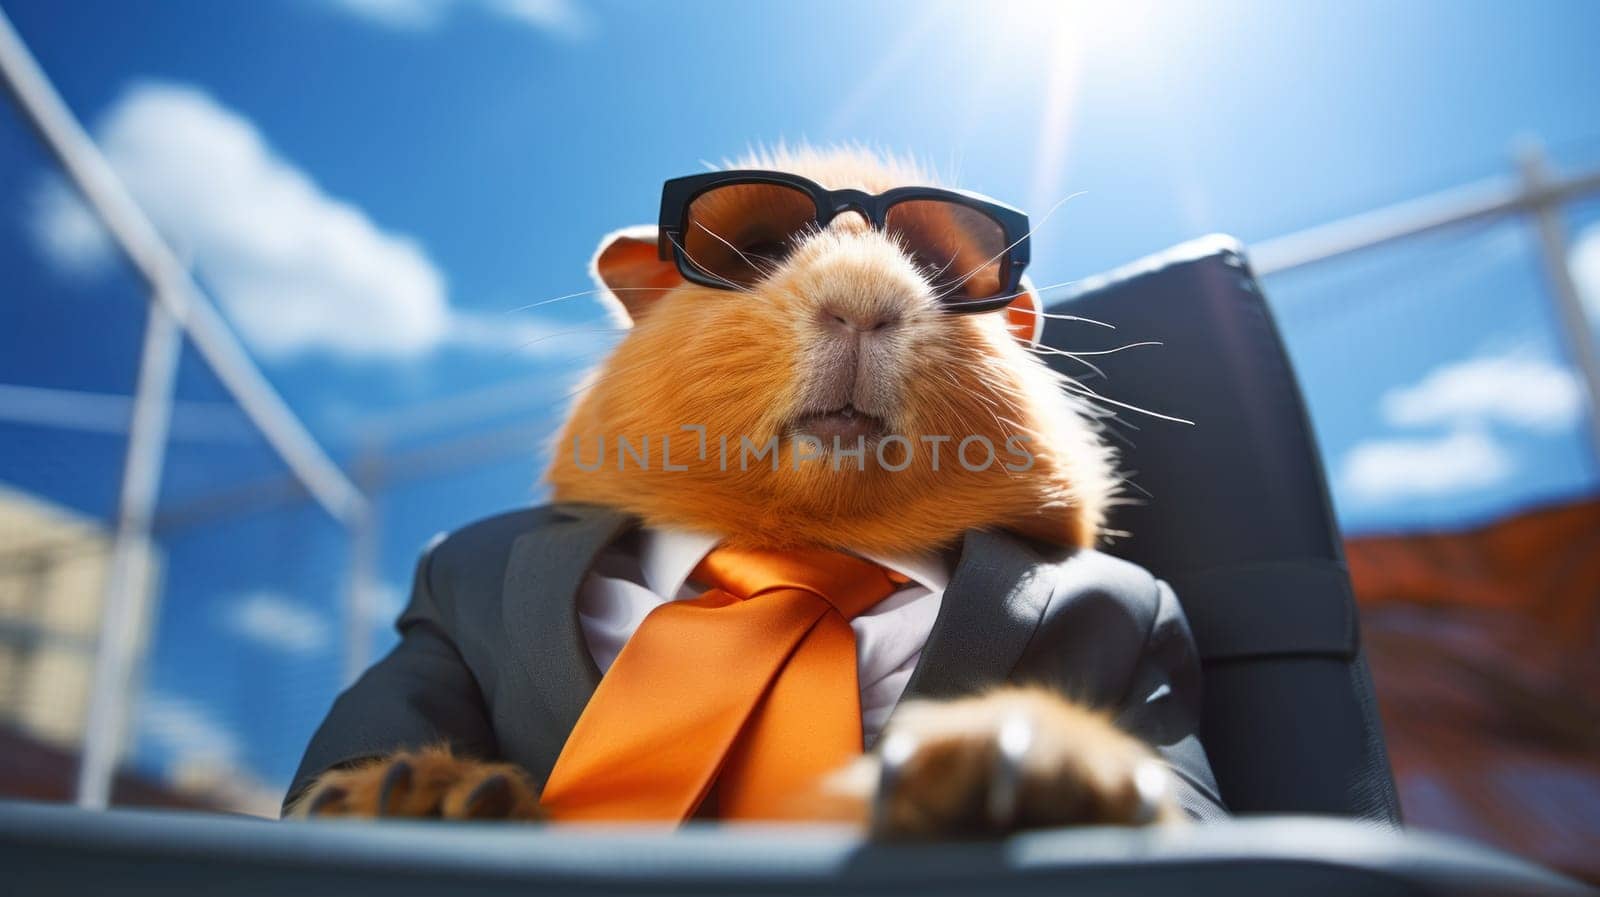 A guinea pig wearing a suit and tie with sunglasses